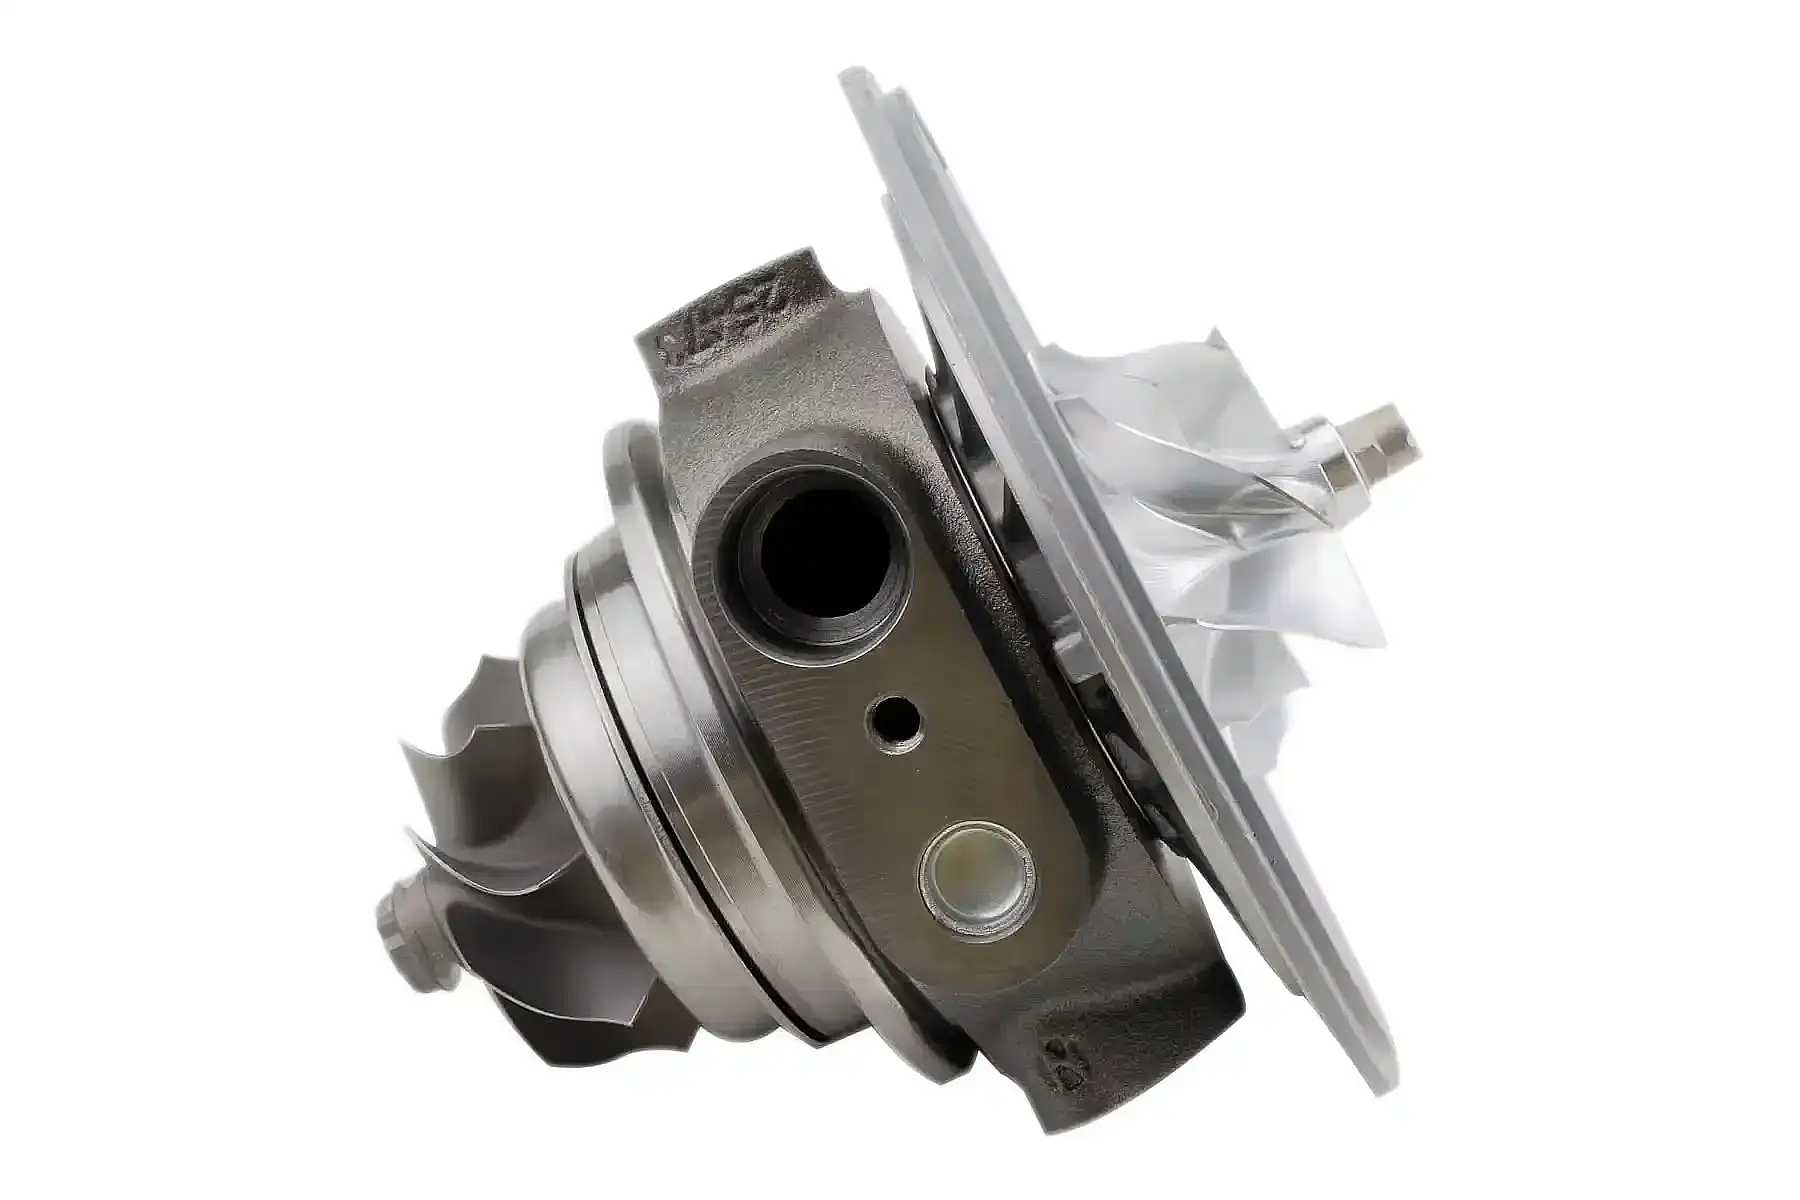 core assembly 2.0L TSI EA888 Gen.3 for turbocharger IS38